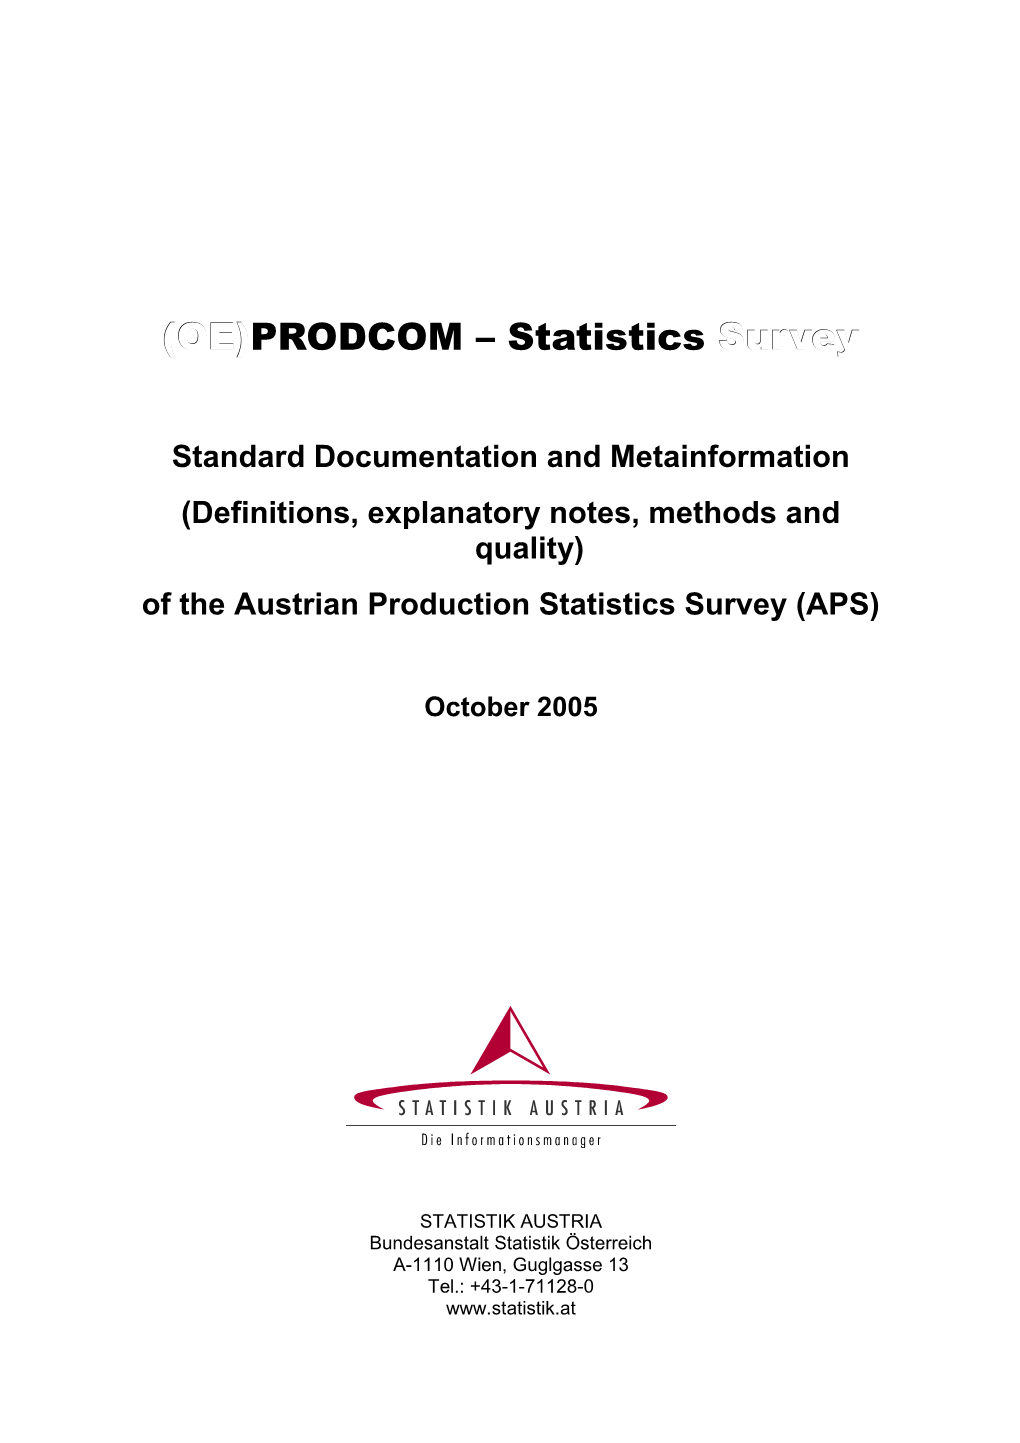 Standard Documentation and Metainformation